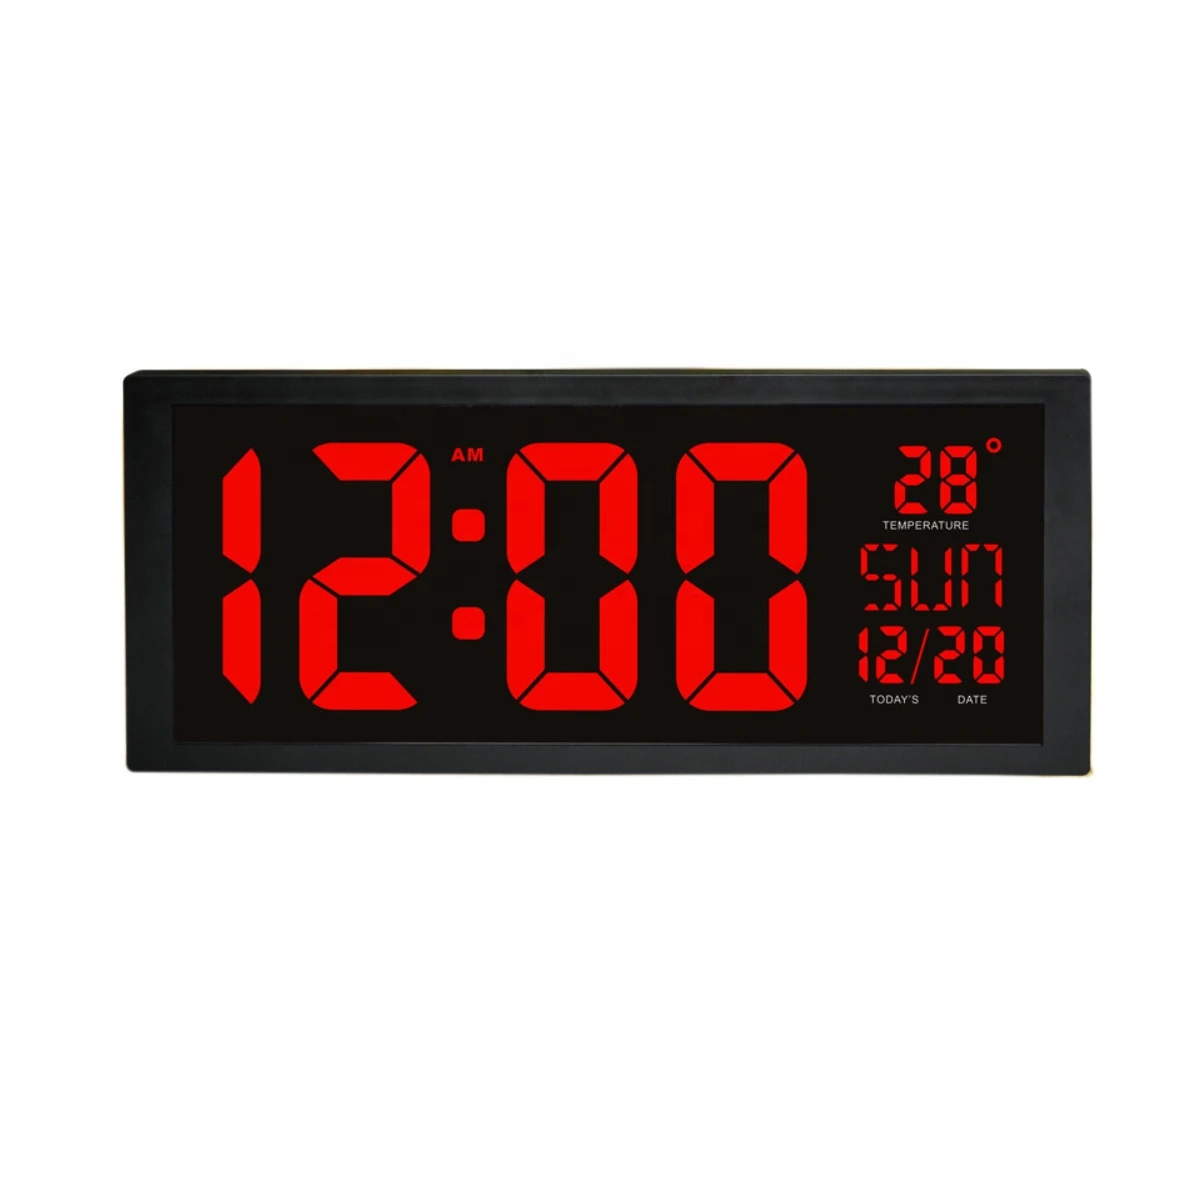 wall clock with temperature display for home decoration luxury wall clock